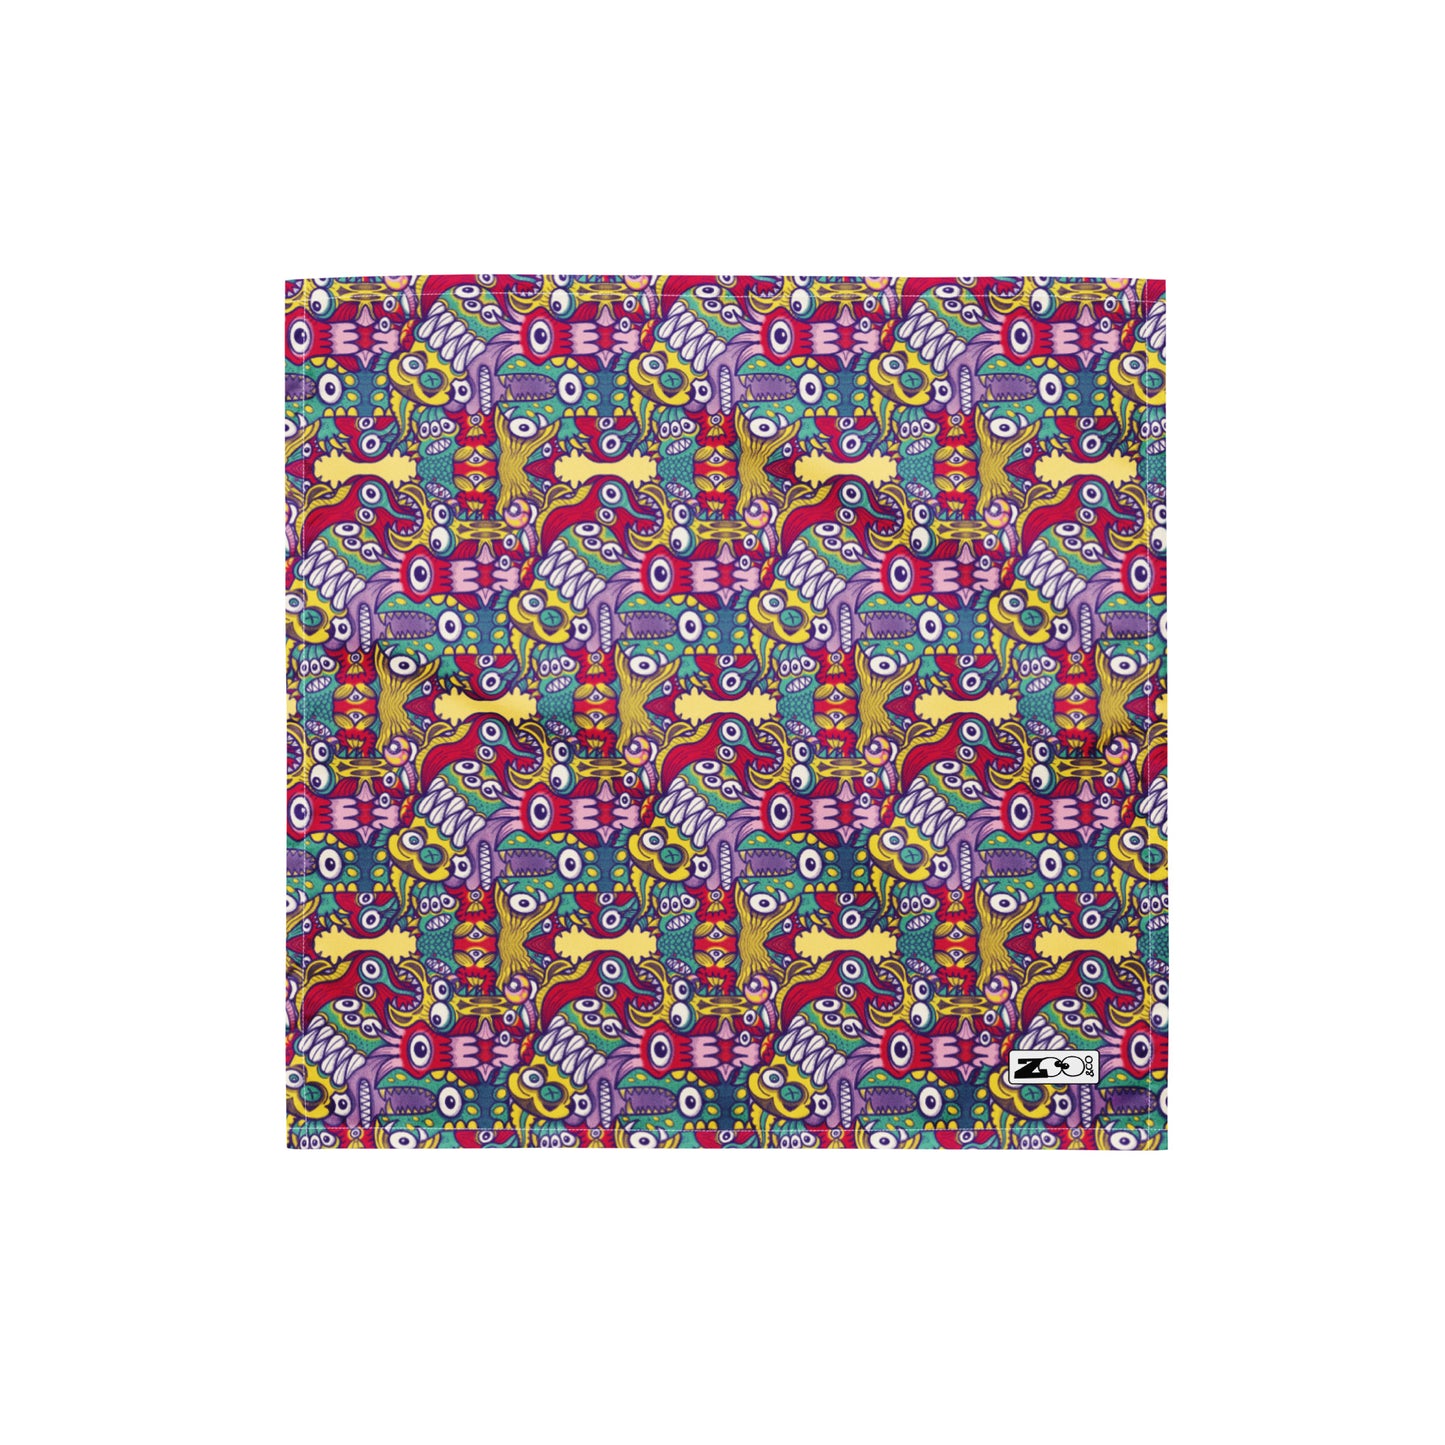 Exquisite corpse of doodles in a pattern design All-over print bandana. Small size